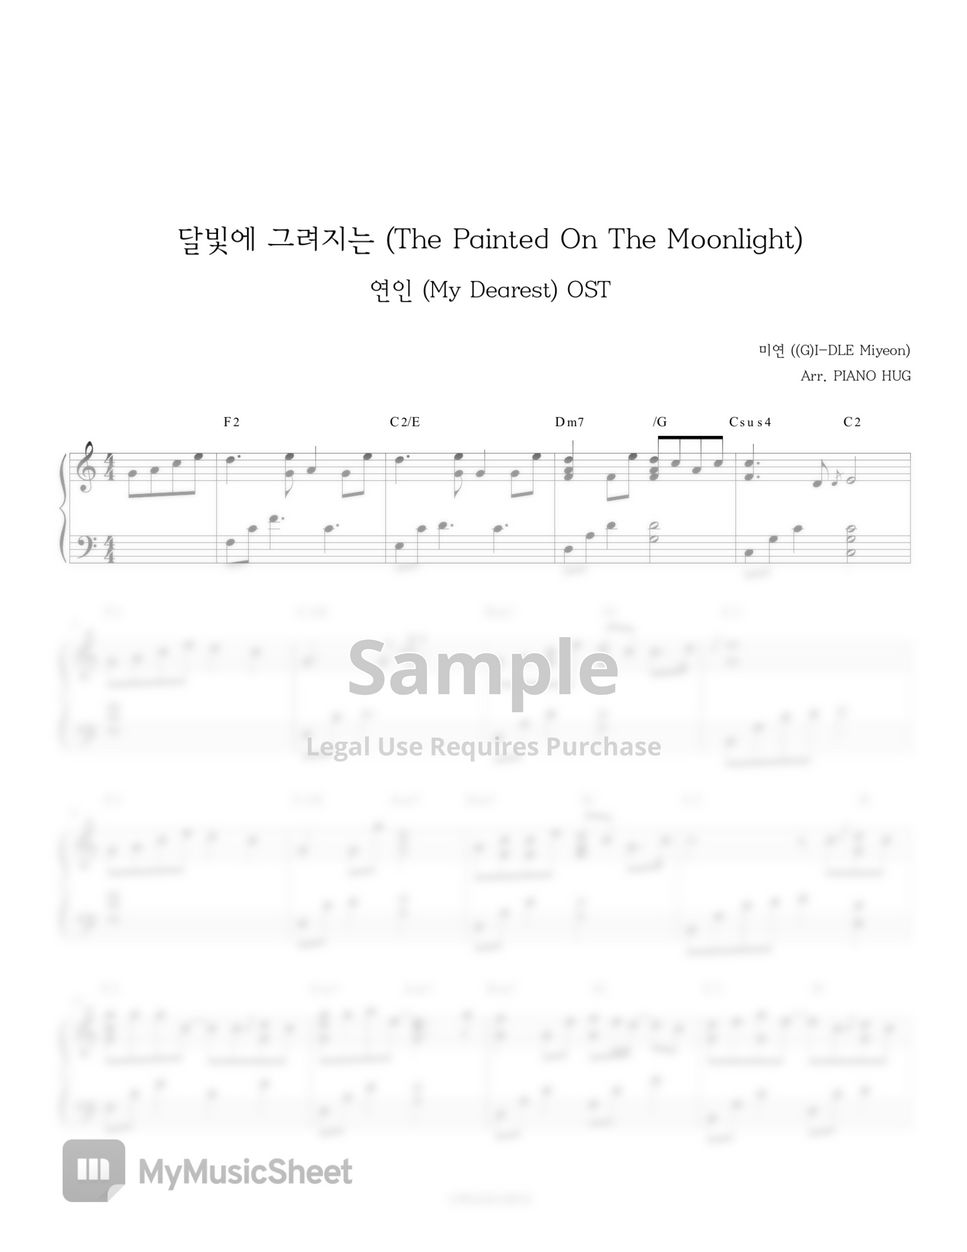 Miyeon ((G) I-DEL) - The Painted On The Moonlight (달빛에 그려지는) (My Dearest) OST by Piano Hug